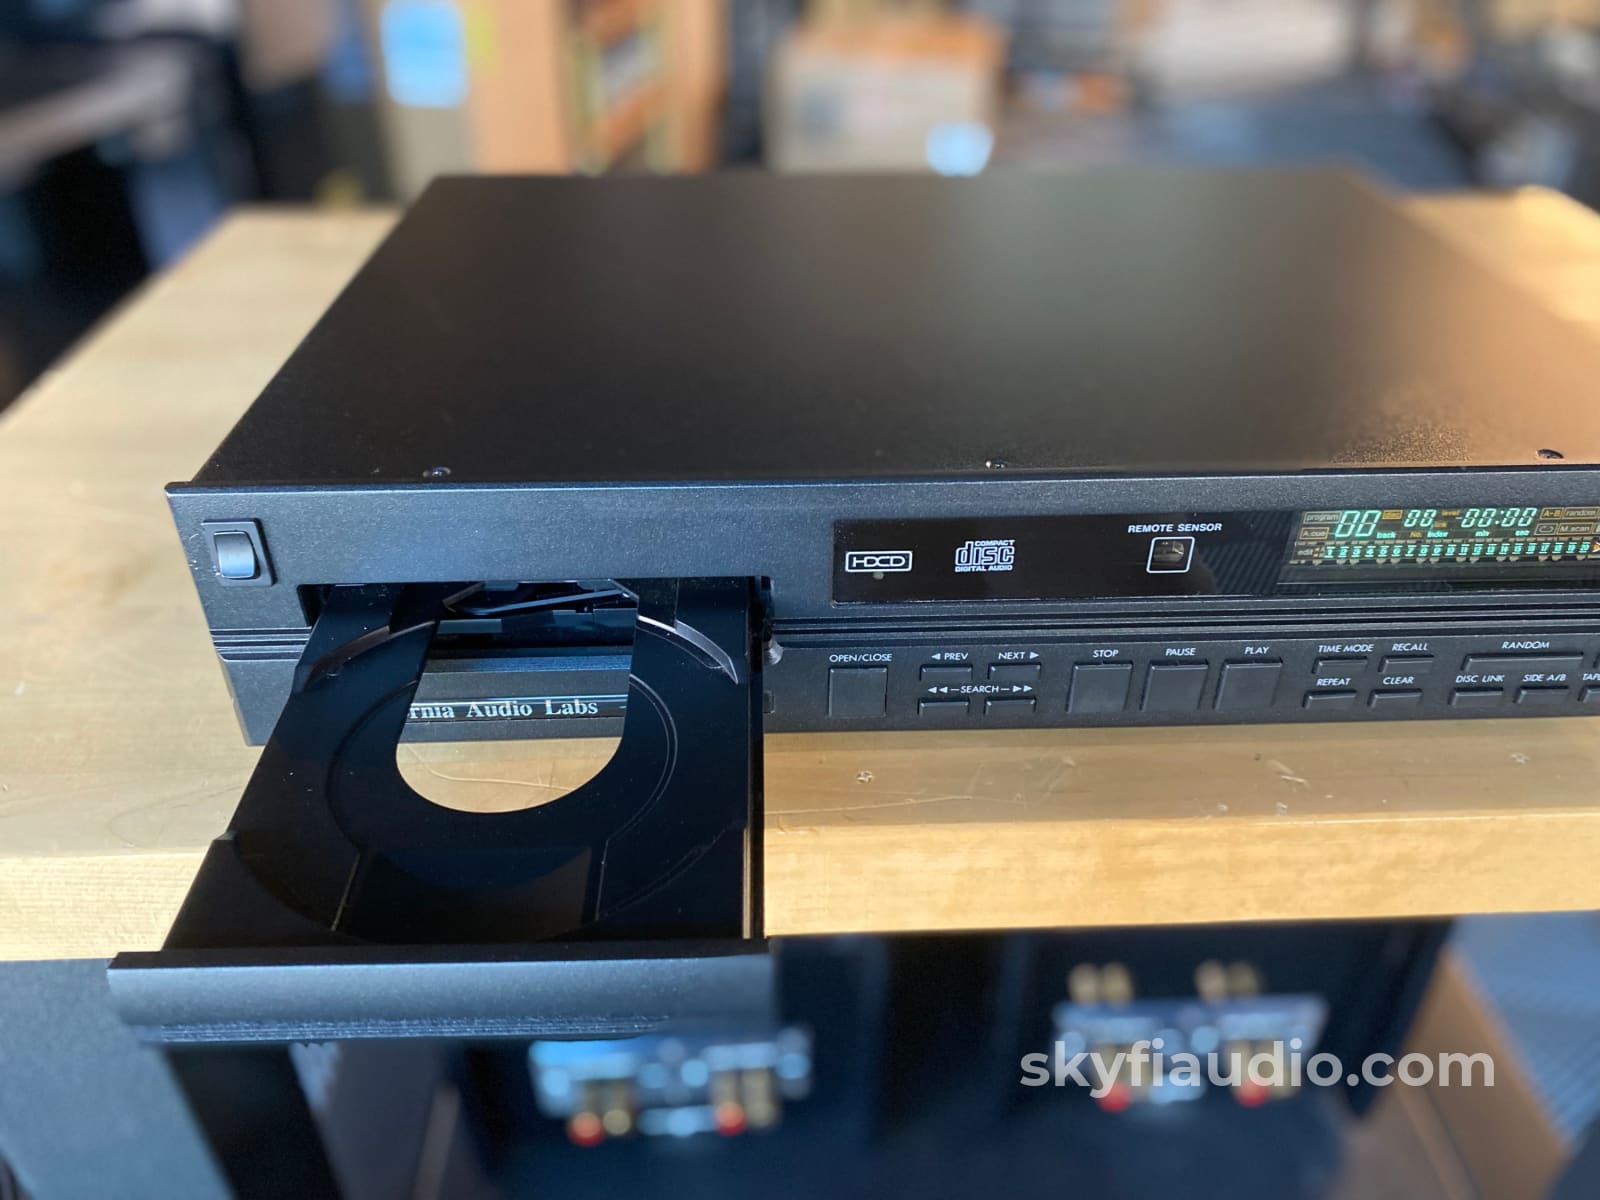 California Audio Labs Icon Mkii With Hdcd - Best Selling Vintage Cd Player + Digital